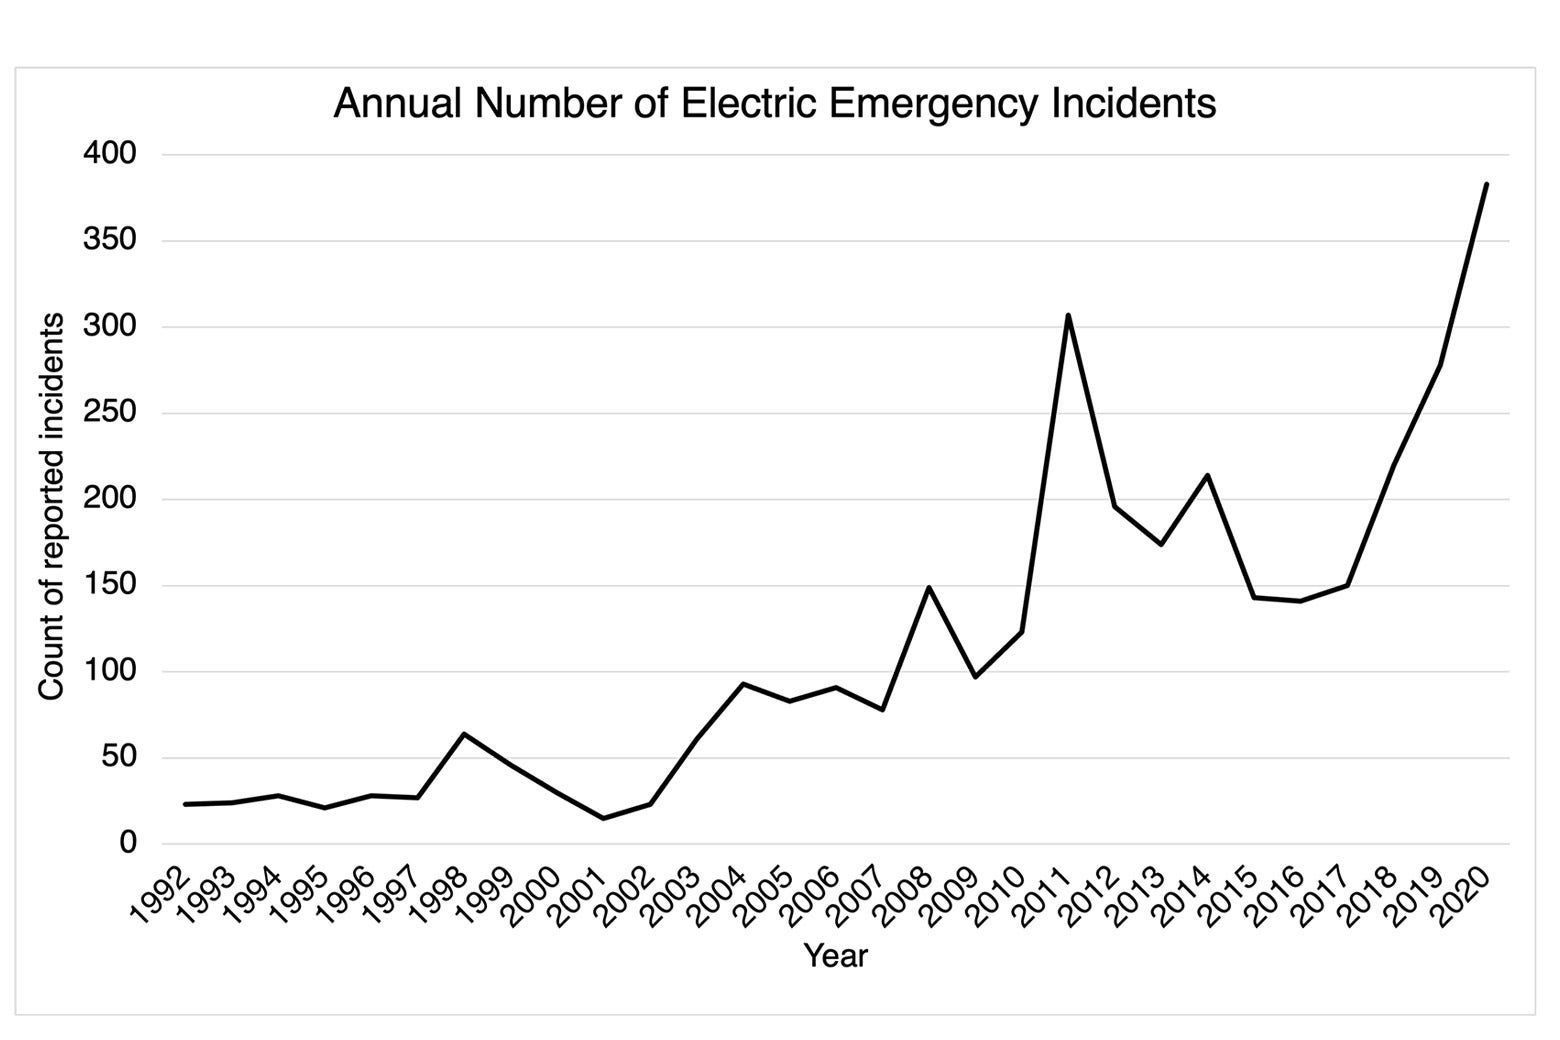 Chart showing an increase in annual electric emergency incidents in the U.S. from 1992 to 2020.